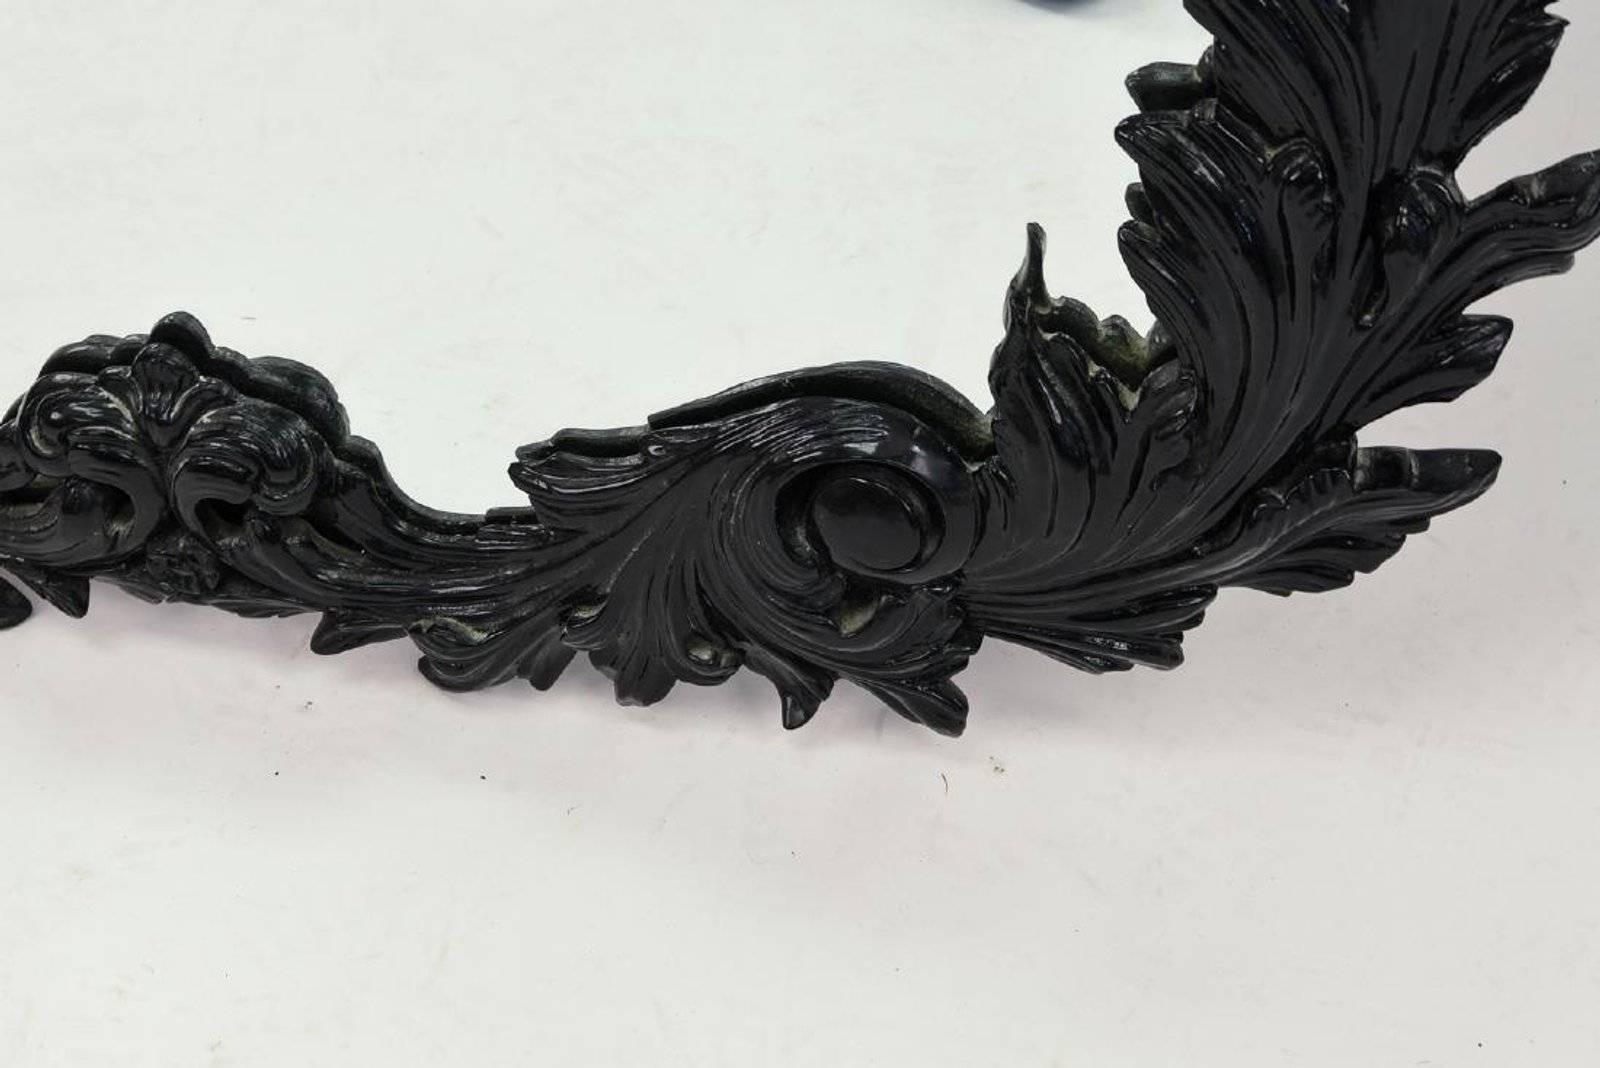 Stunning high gloss black lacquered Rococo style wall mirror. Made of carved wood and ready to hang with existing hardware.
Search terms:  Hollywood Regency style mirror.